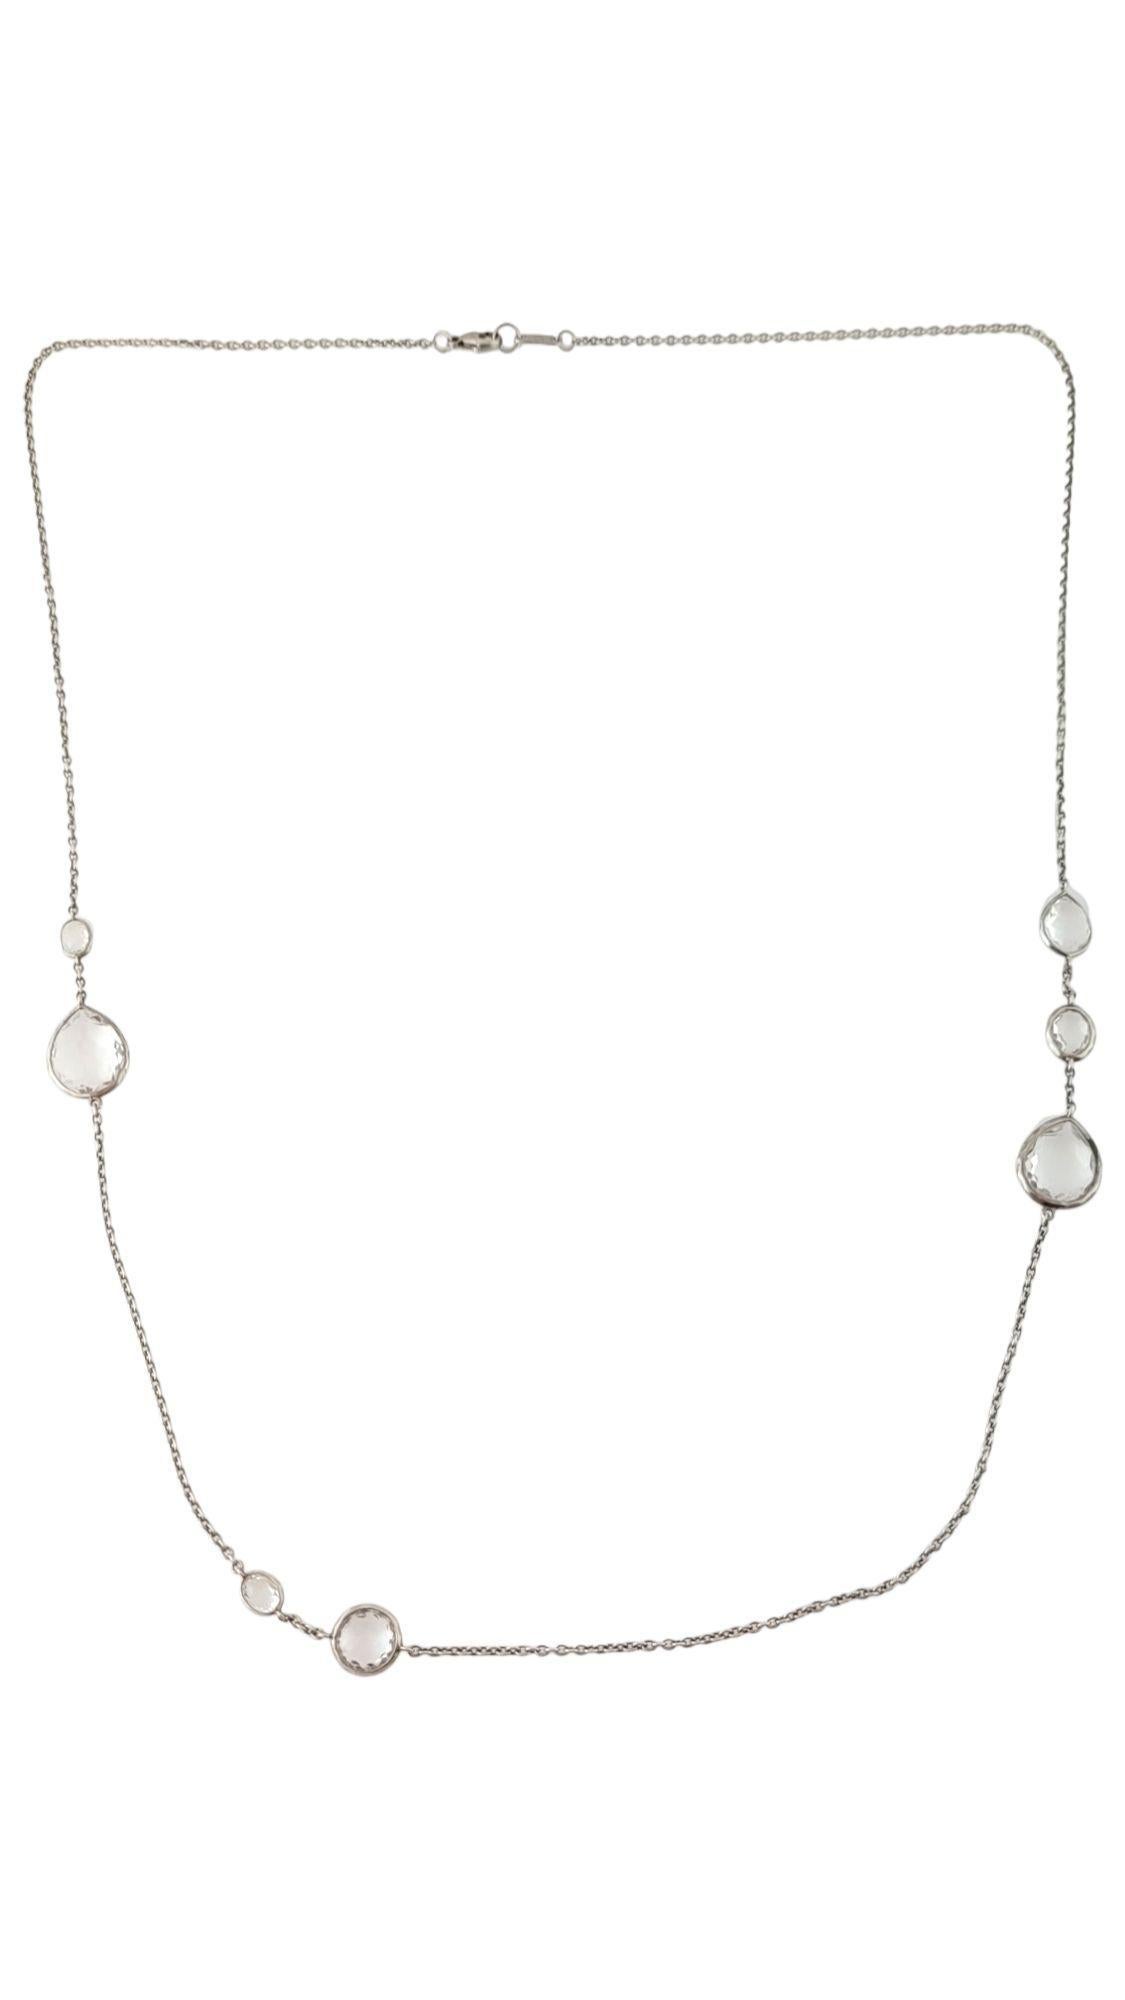 Ippolita 925 Sterling Silver Rock Candy Necklace

This gorgeous Ippolita rock candy necklace features 7 clear quartz set in a 925 sterling silver chain!

Chain length: 33 1/4